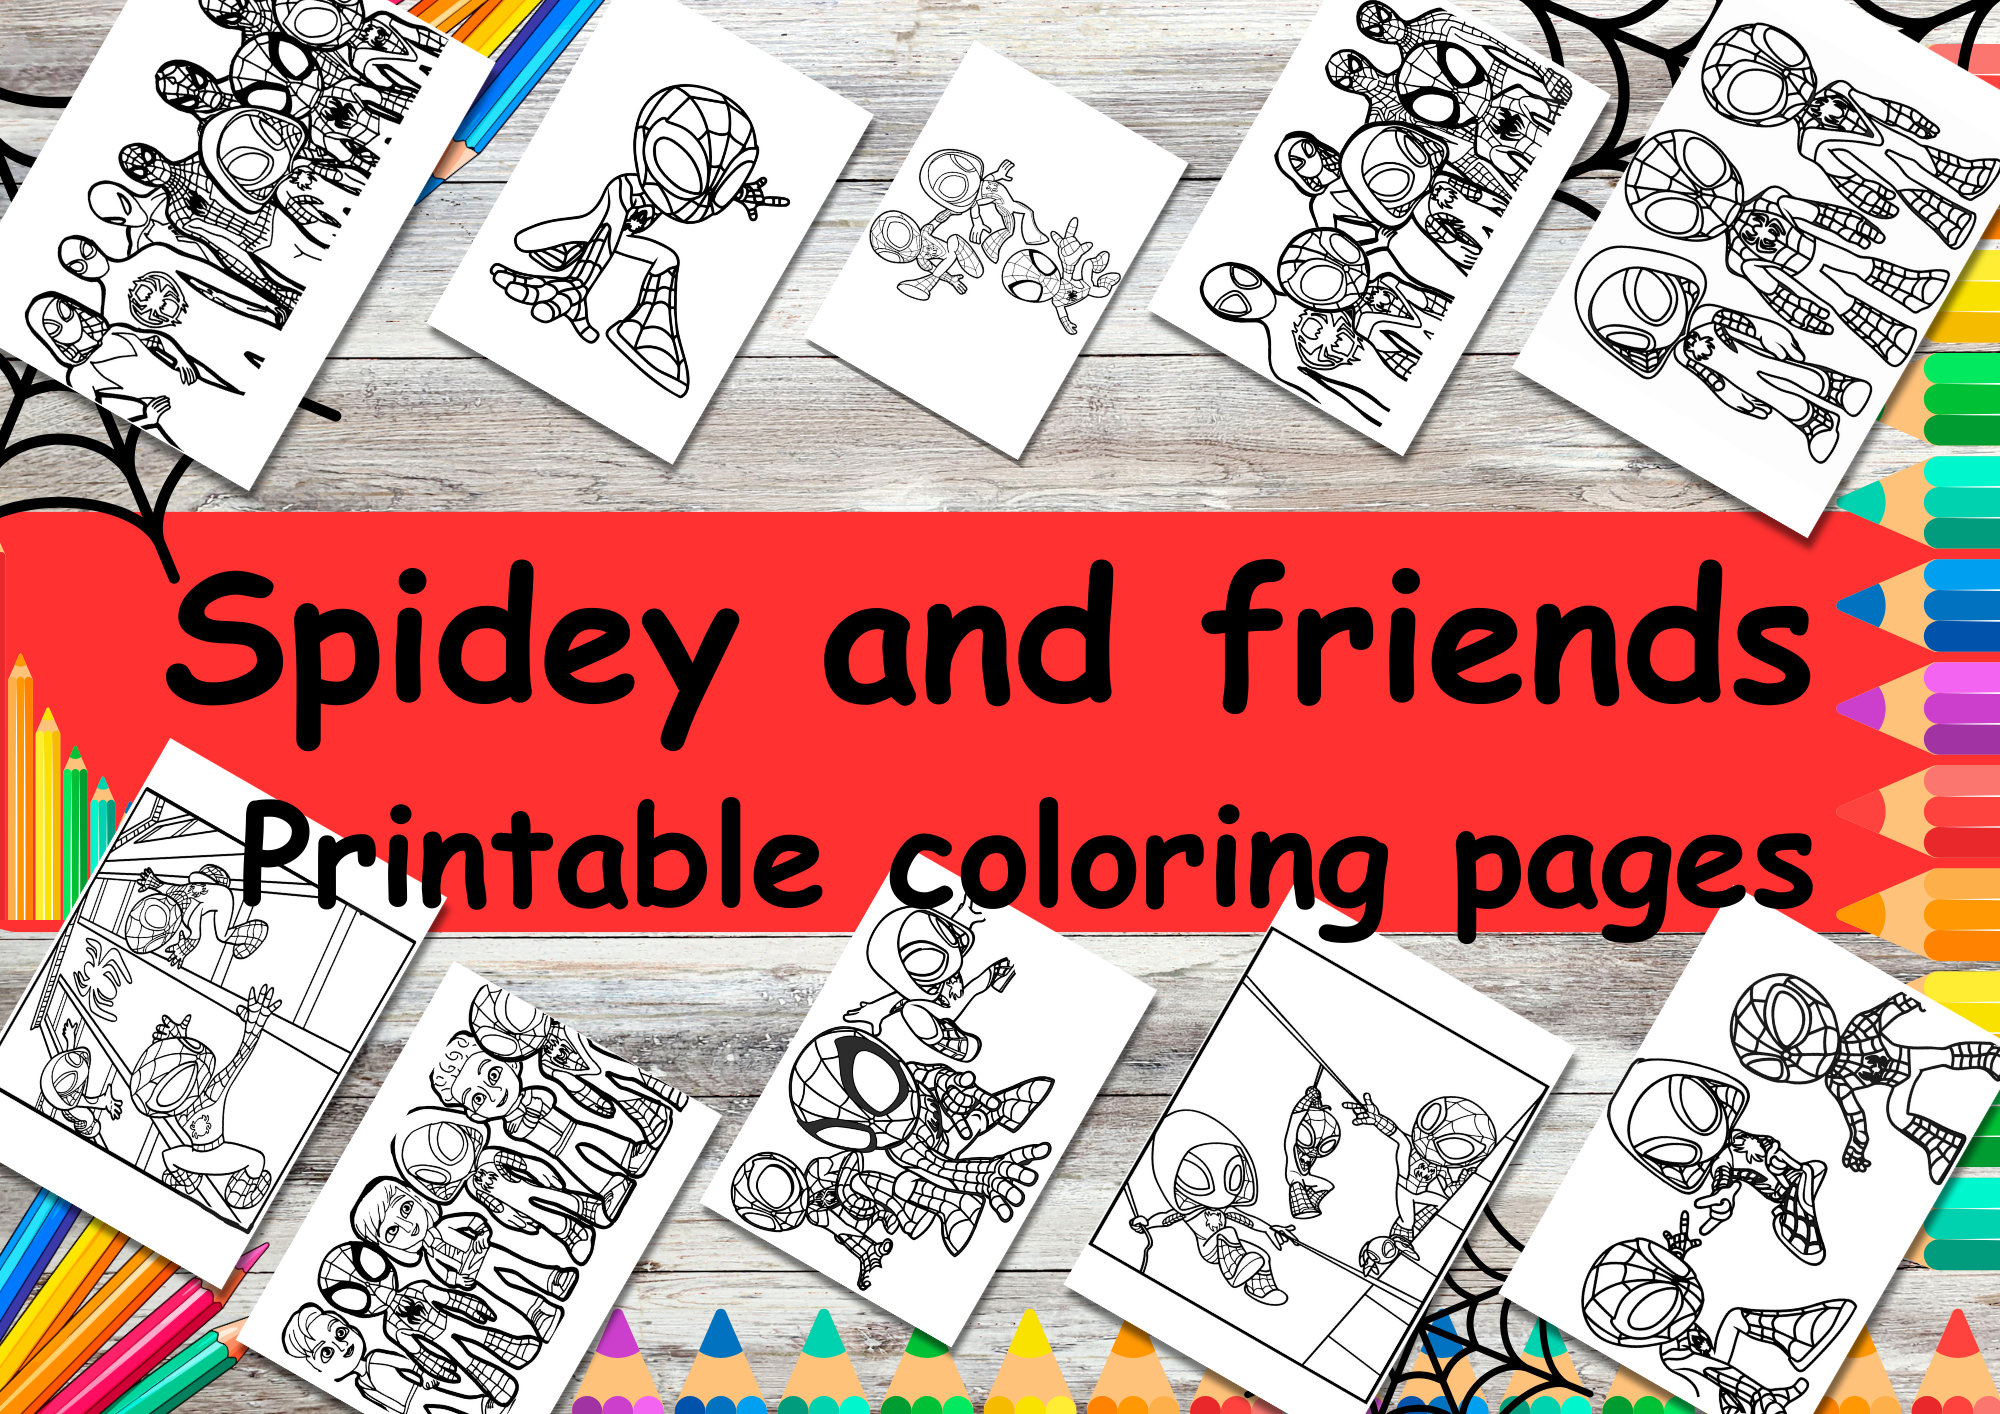 Spiderman, Spiderman Mini Coloring Pages and Crayons, Spiderman